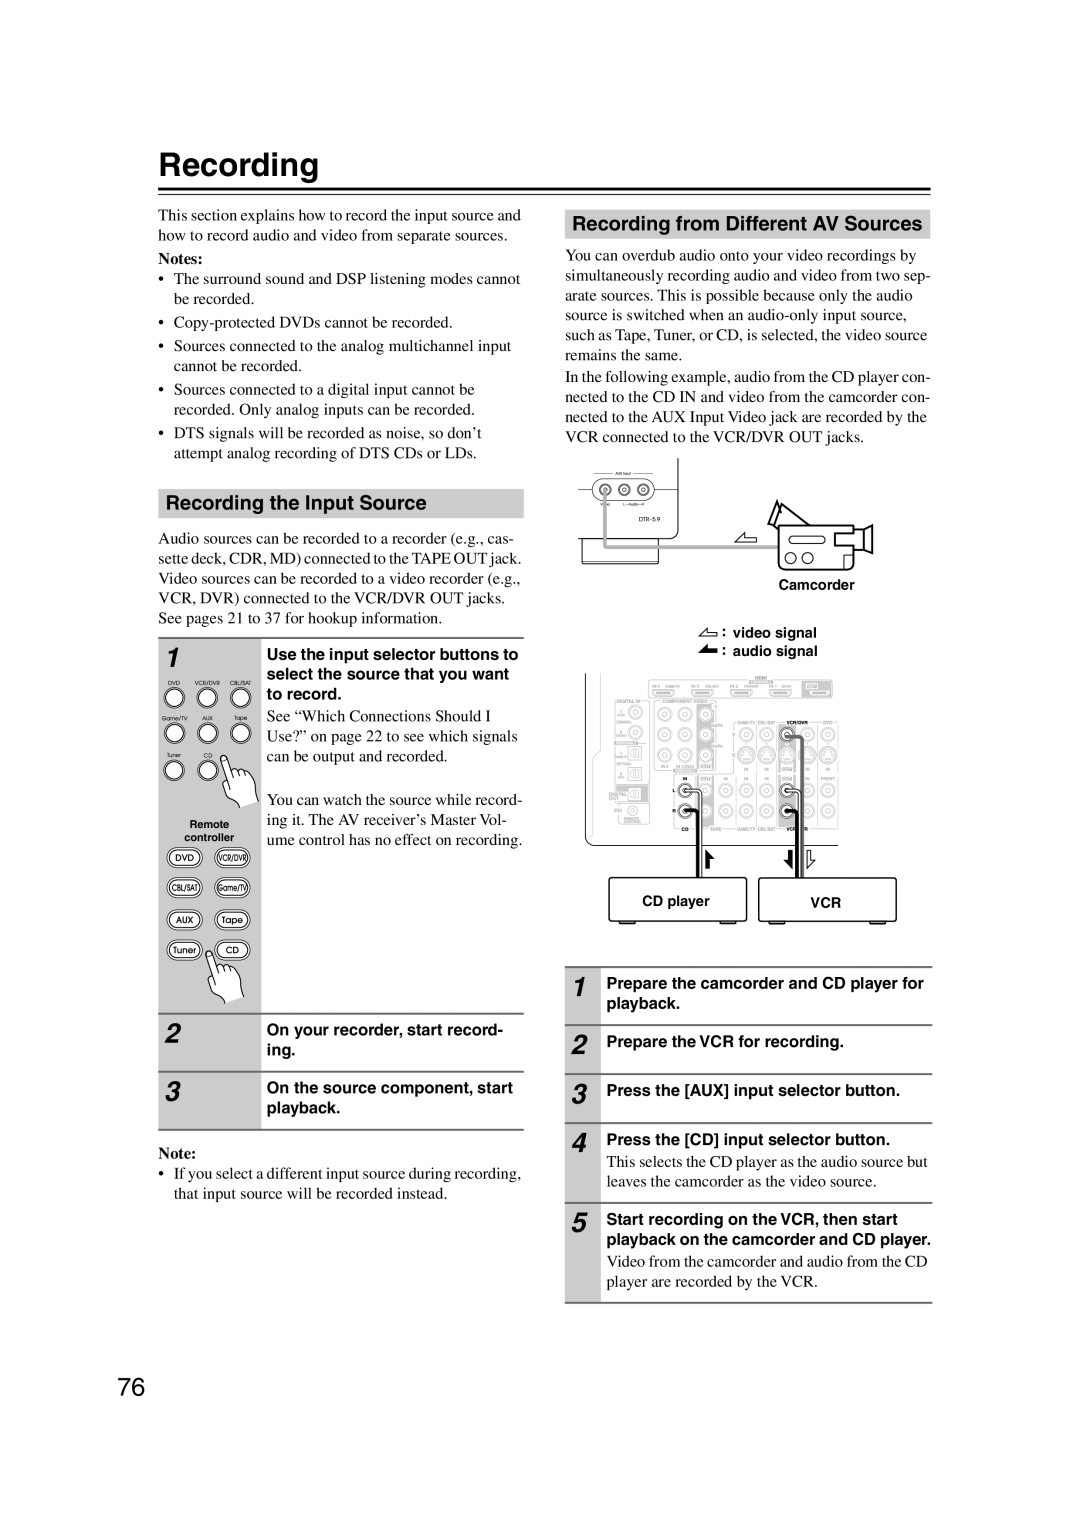 Integra DTR-5.9 instruction manual Recording the Input Source, Recording from Different AV Sources, Notes 